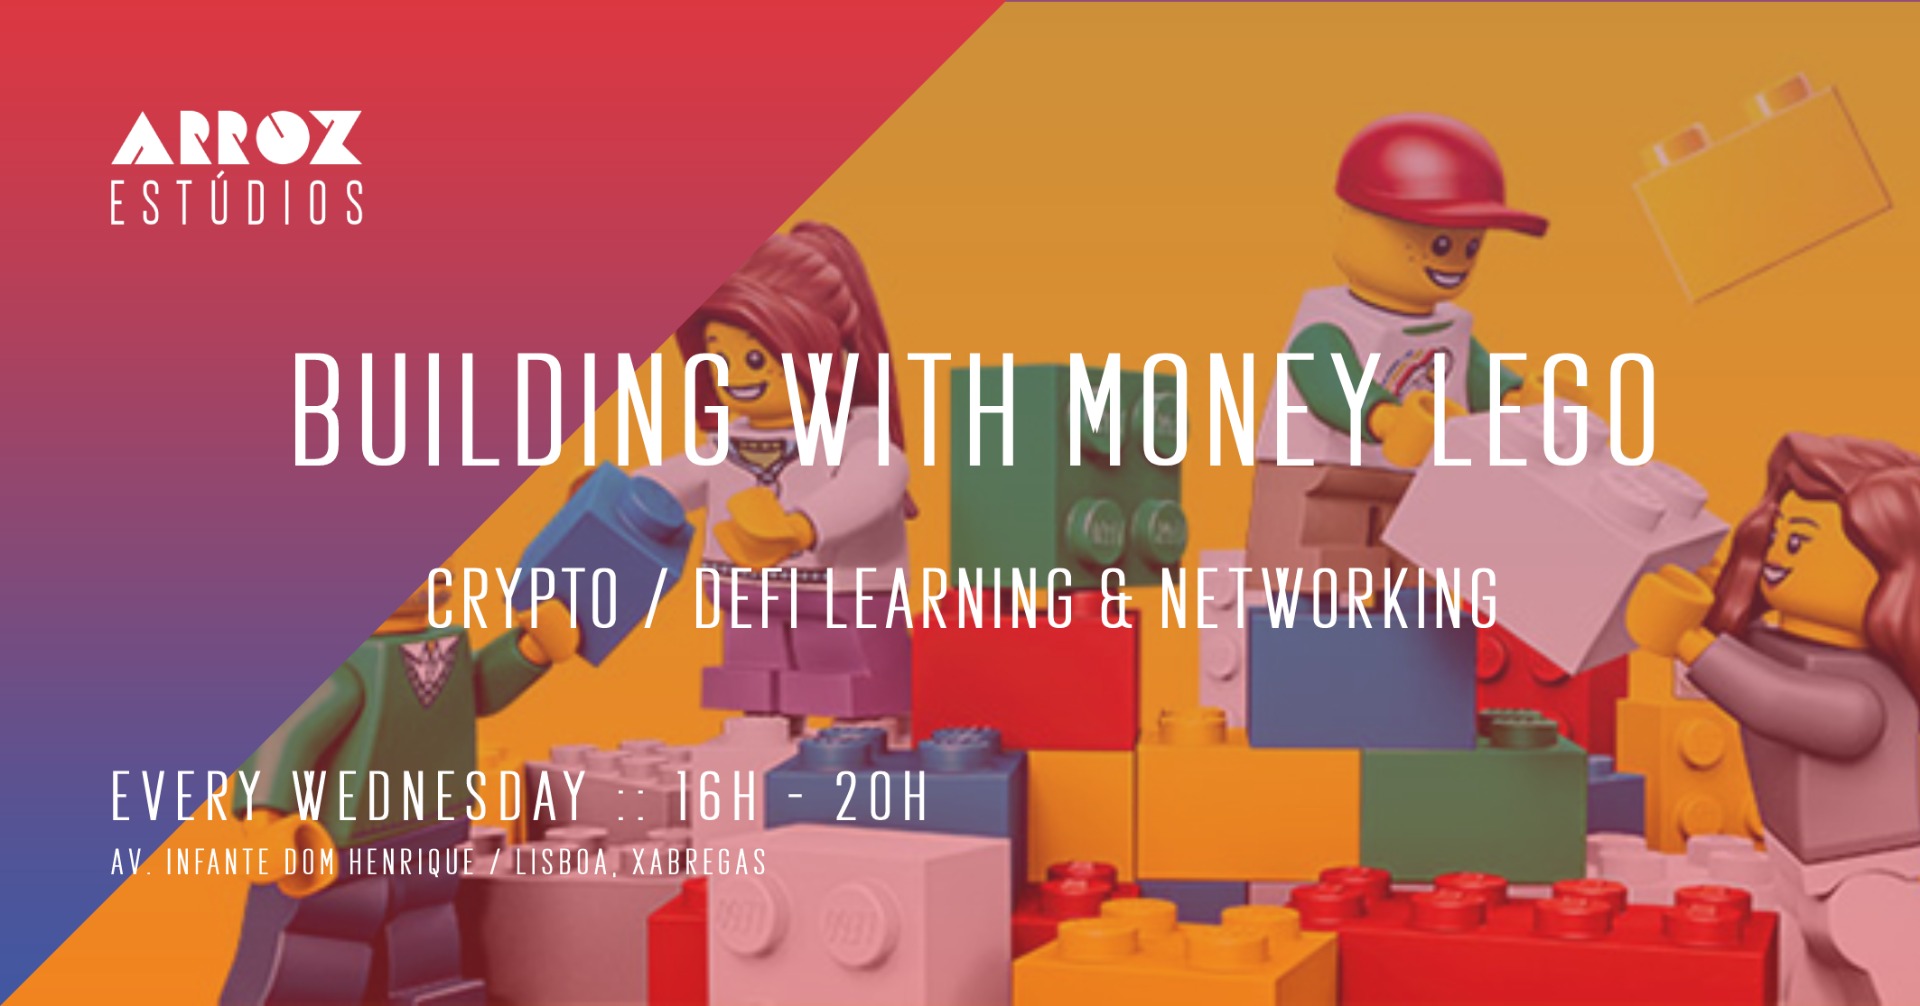 Building with money Lego: Dreams of Governance